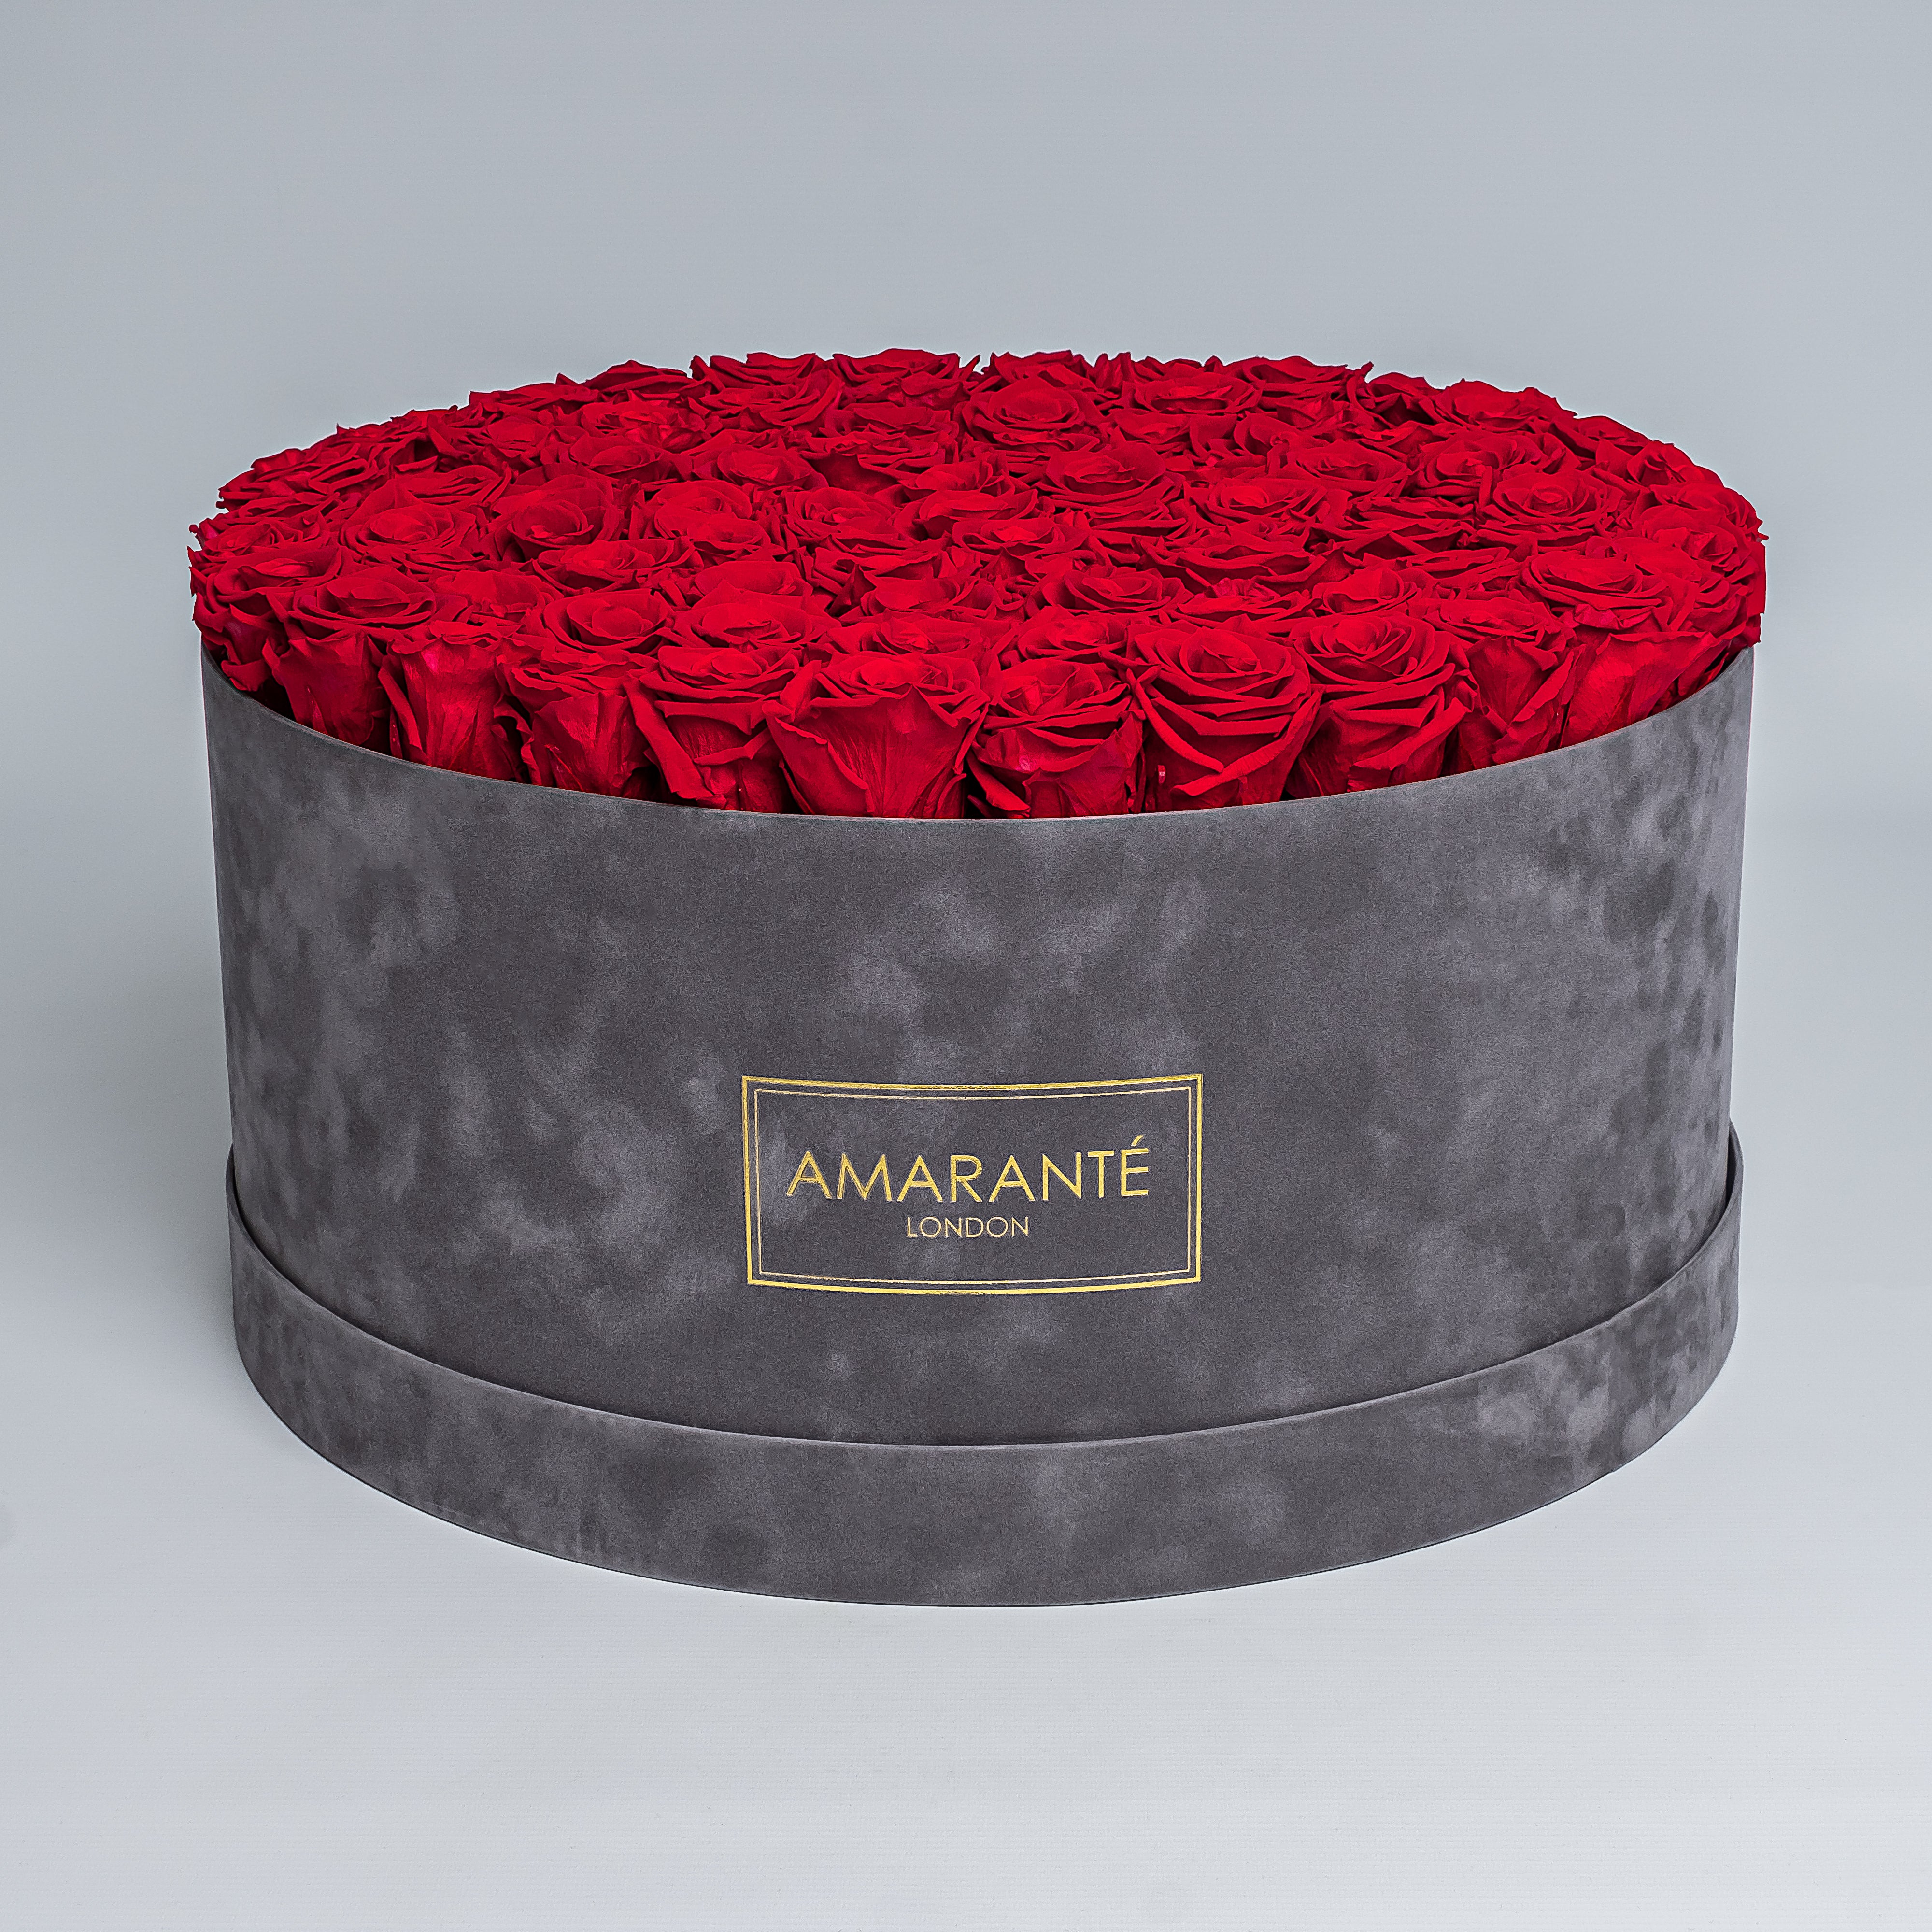 Mesmerising bouquet of 100 light red infinity roses nestled in a grey round rose box with delicate suede finish. Exquisite gift for showing timeless love and affection. FreeUK Delivery.